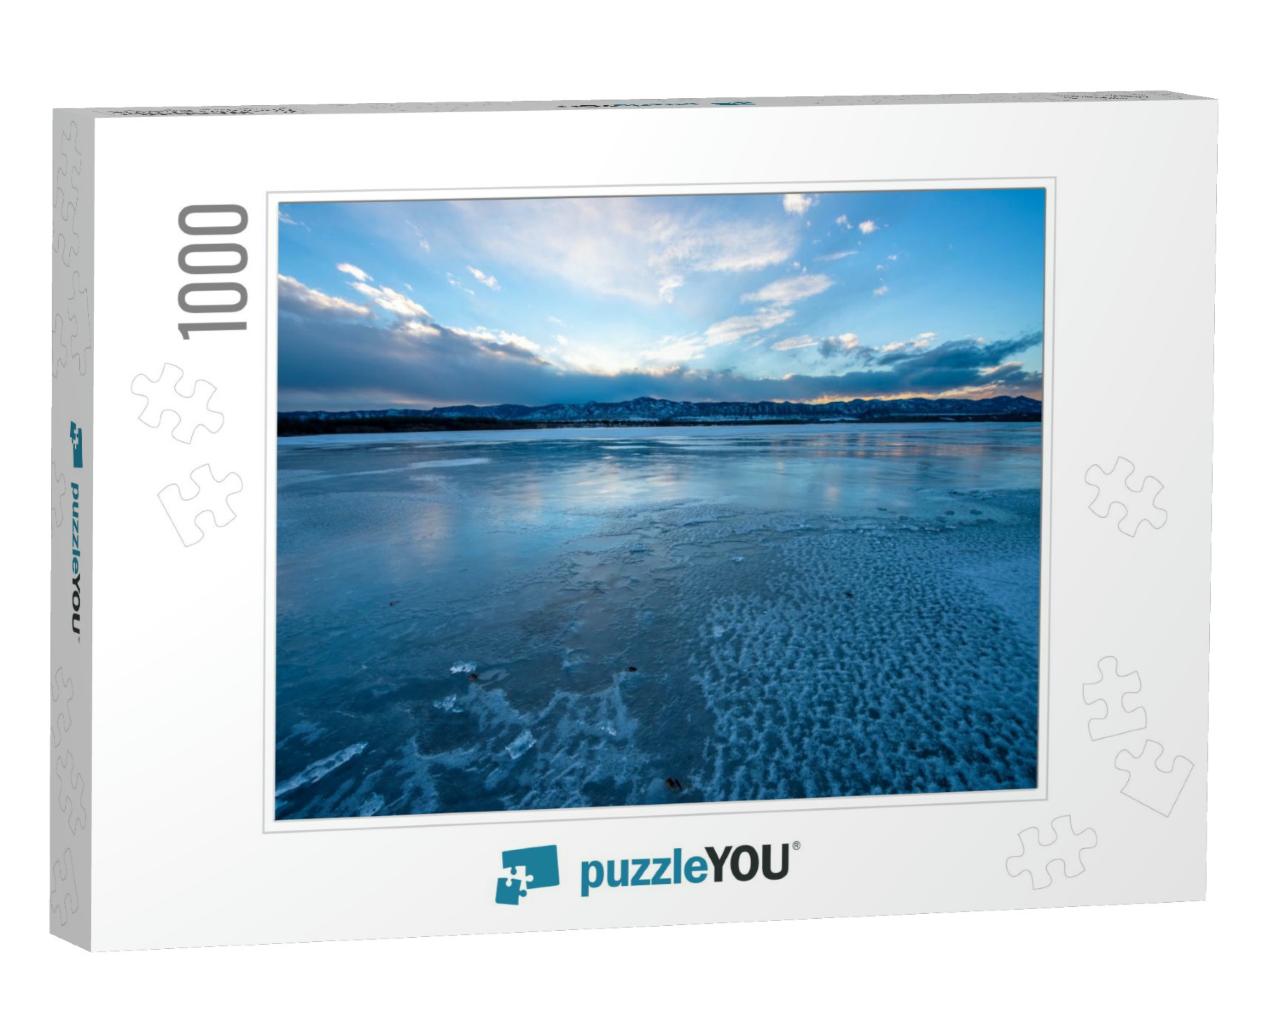 Sunset Stormy Icy Lake - Sunset At a Frozen Solid Mountai... Jigsaw Puzzle with 1000 pieces